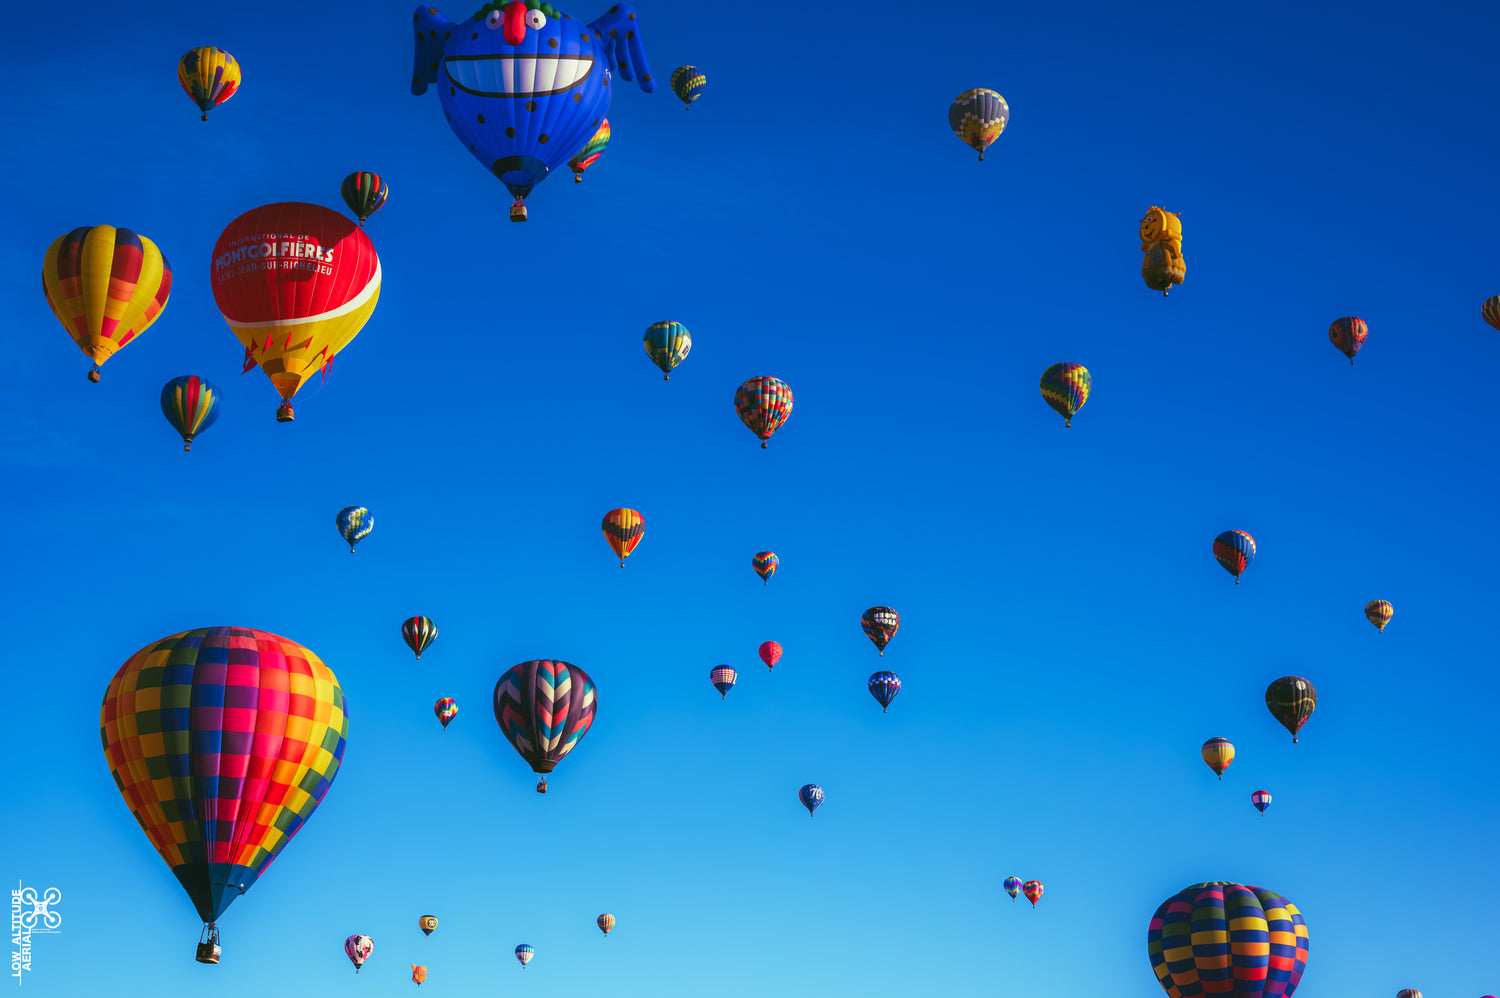 Balloons of New Mexico